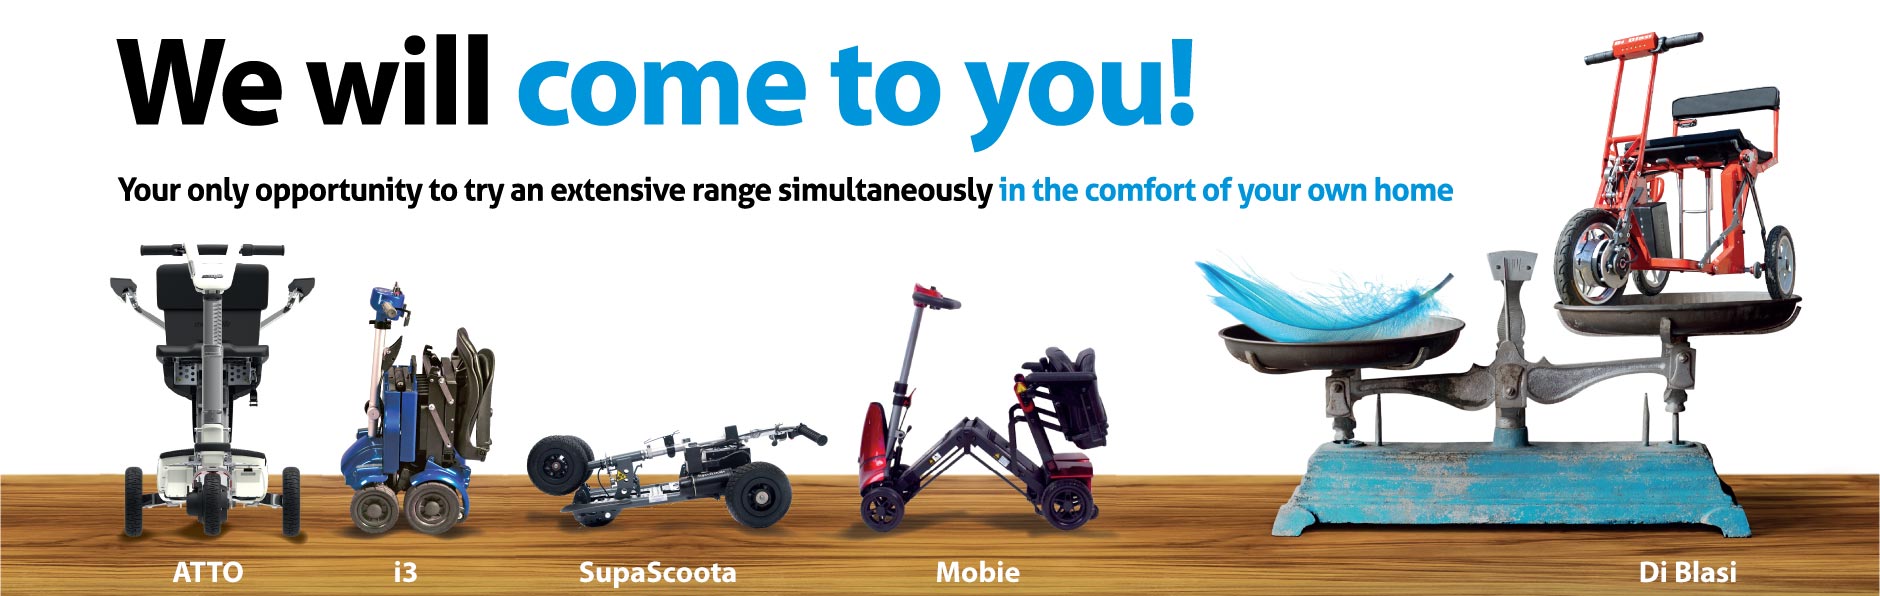 We will come to you. Try our extensive range of lightweight mobility scooters in the comfort of your own home